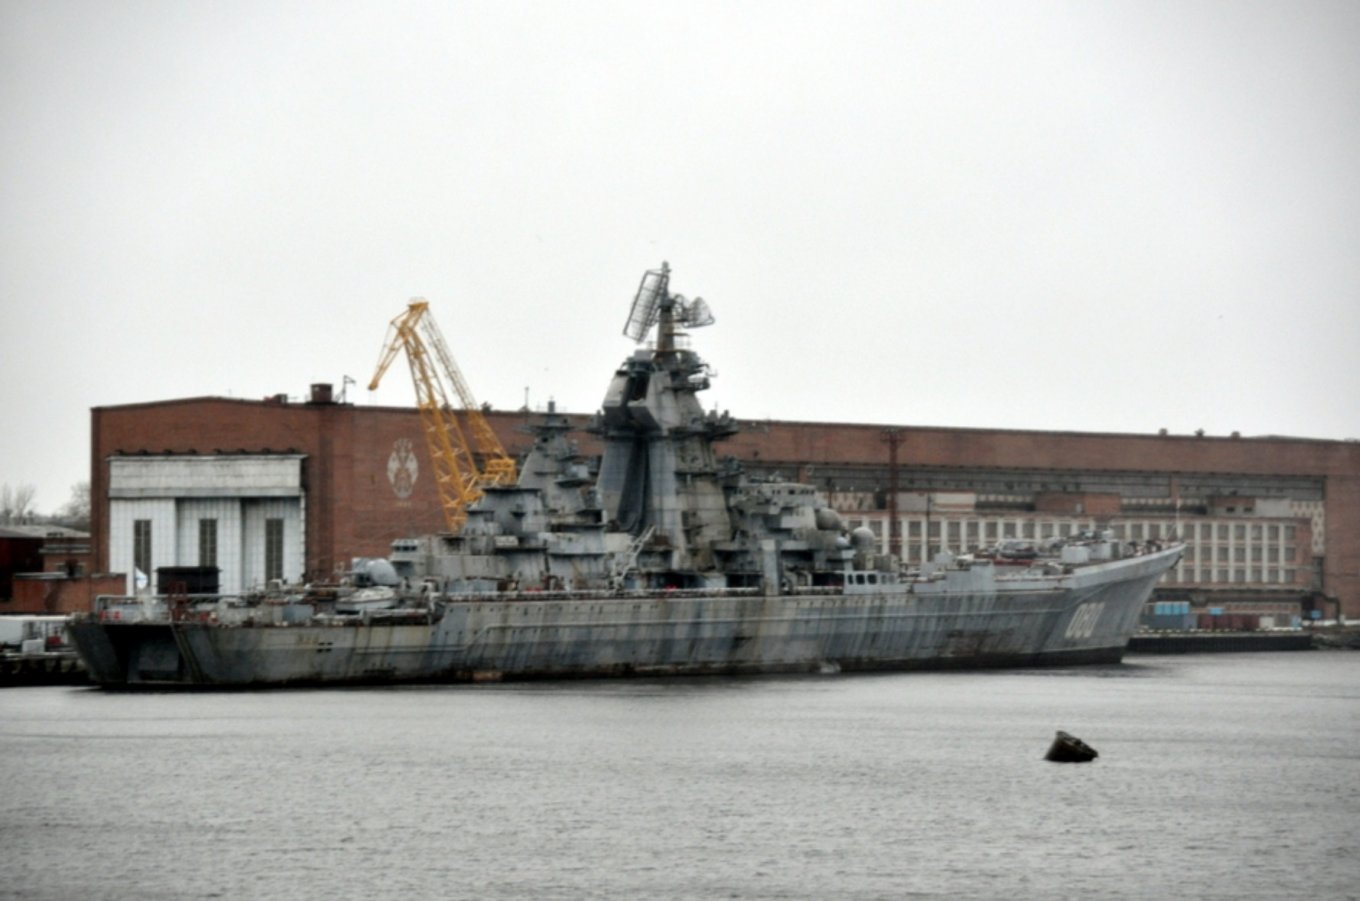 The Admiral Nakhimov nuclear cruiser is on a permanent repair, Despite Moskva Missile Cruiser Demise russians Want to Modernize Flagship of Northern Fleet  the Pyotr Velikiy Сruiser, Defense Express